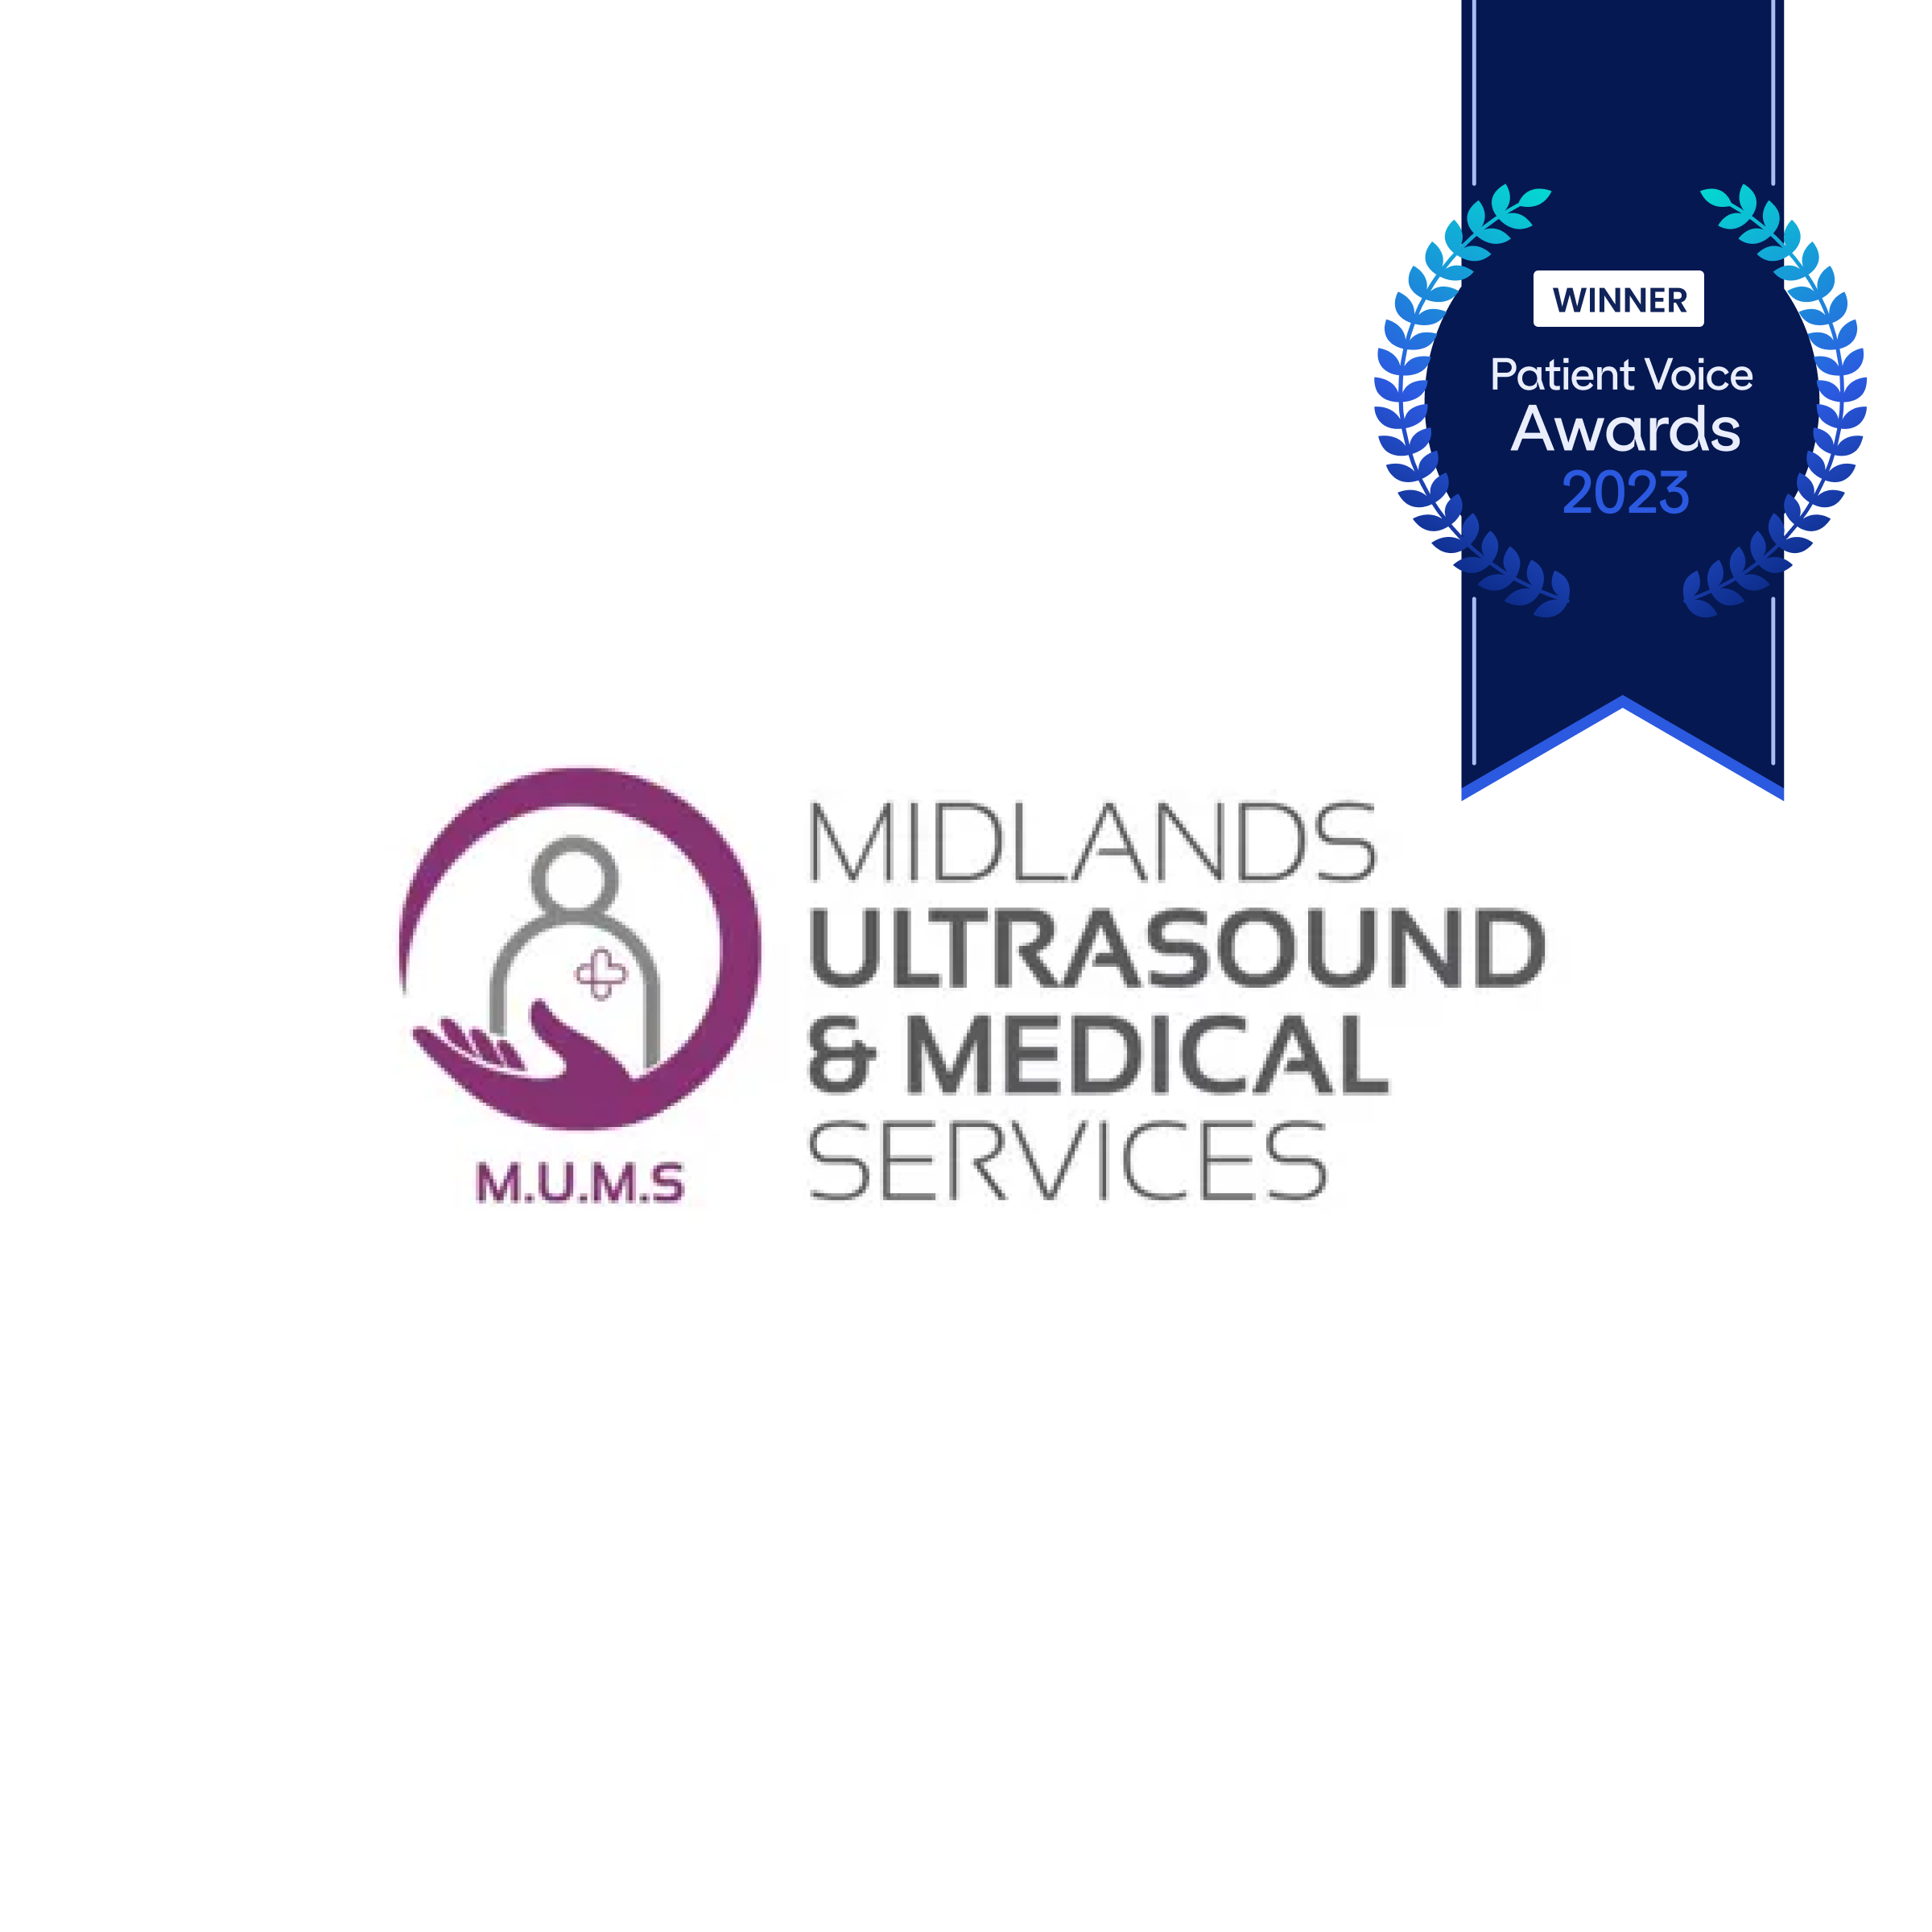 MUMS - Midlands Ultrasound and Medical Services